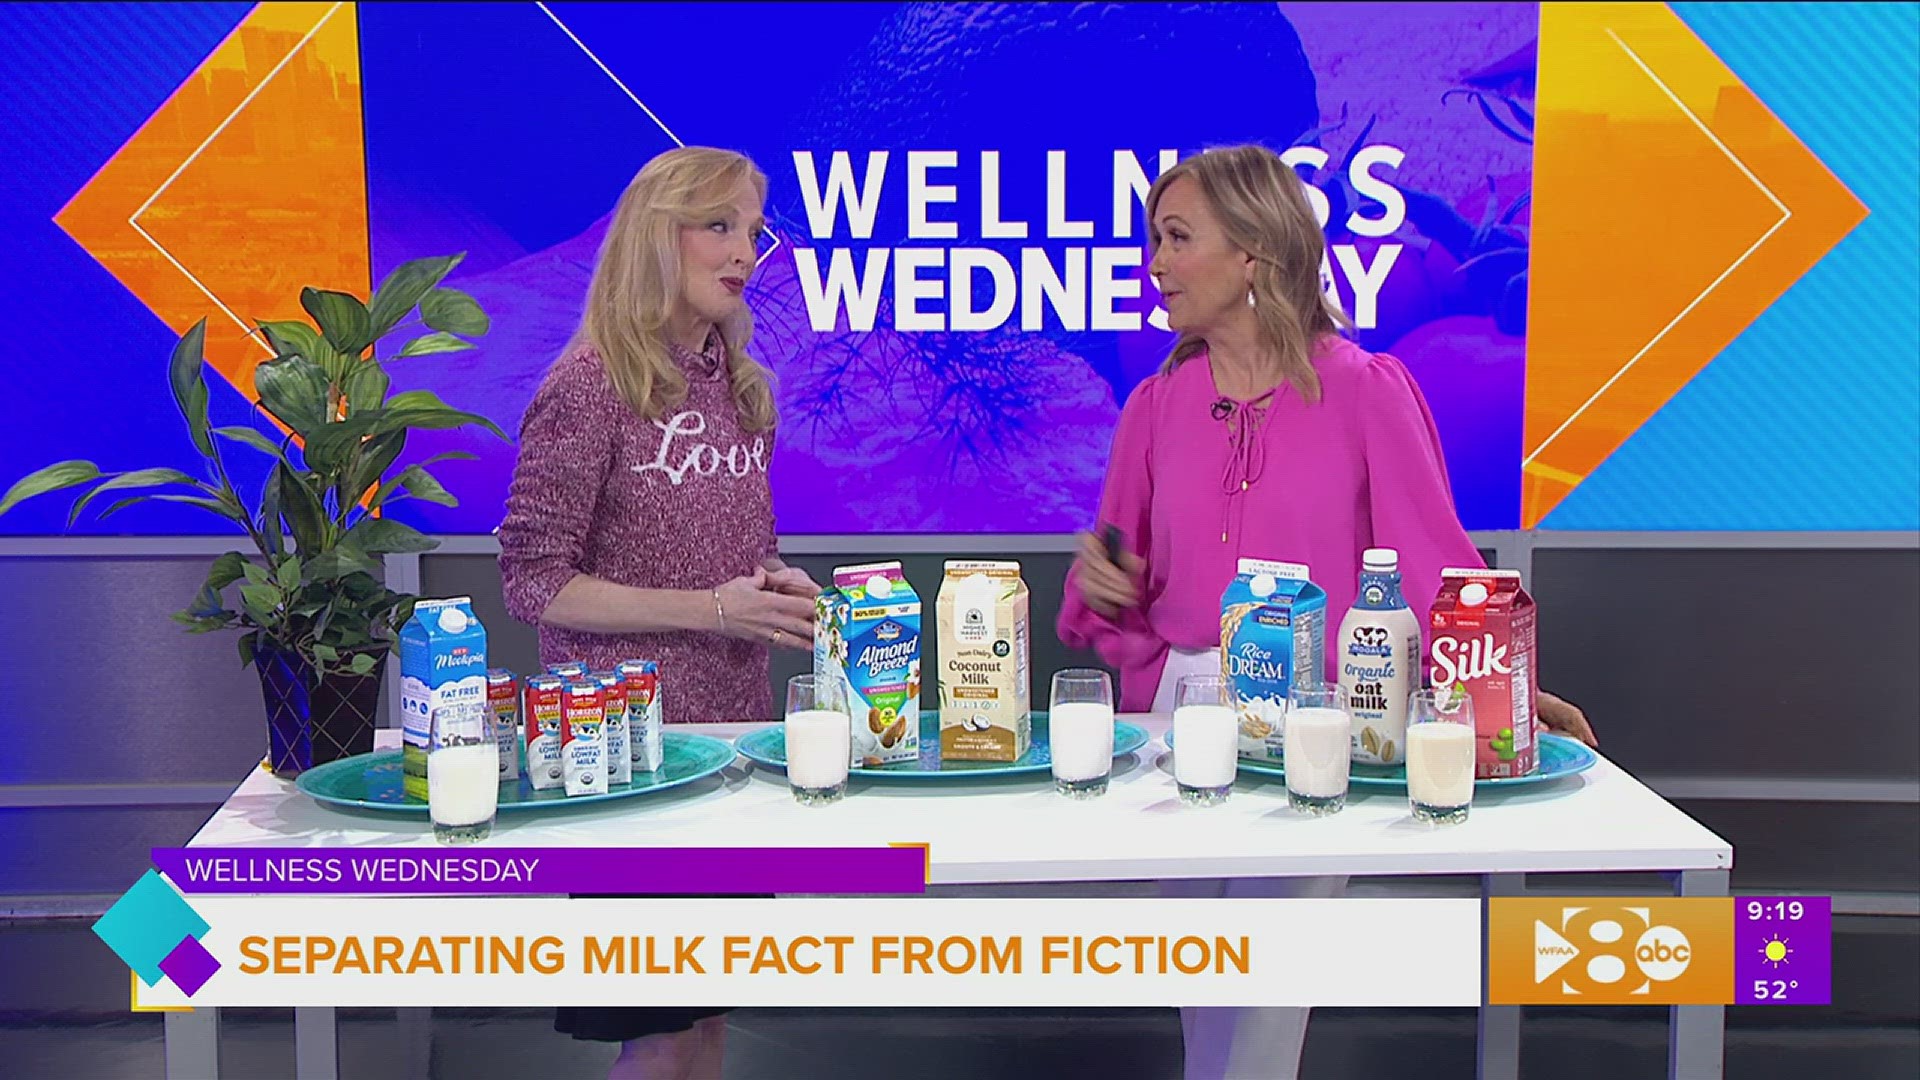 Dietician Meridan Zerner of Cooper Clinic breaks down the nutrition benefits and must knows about cow, almond, coconut, rice, oat, soy milks.